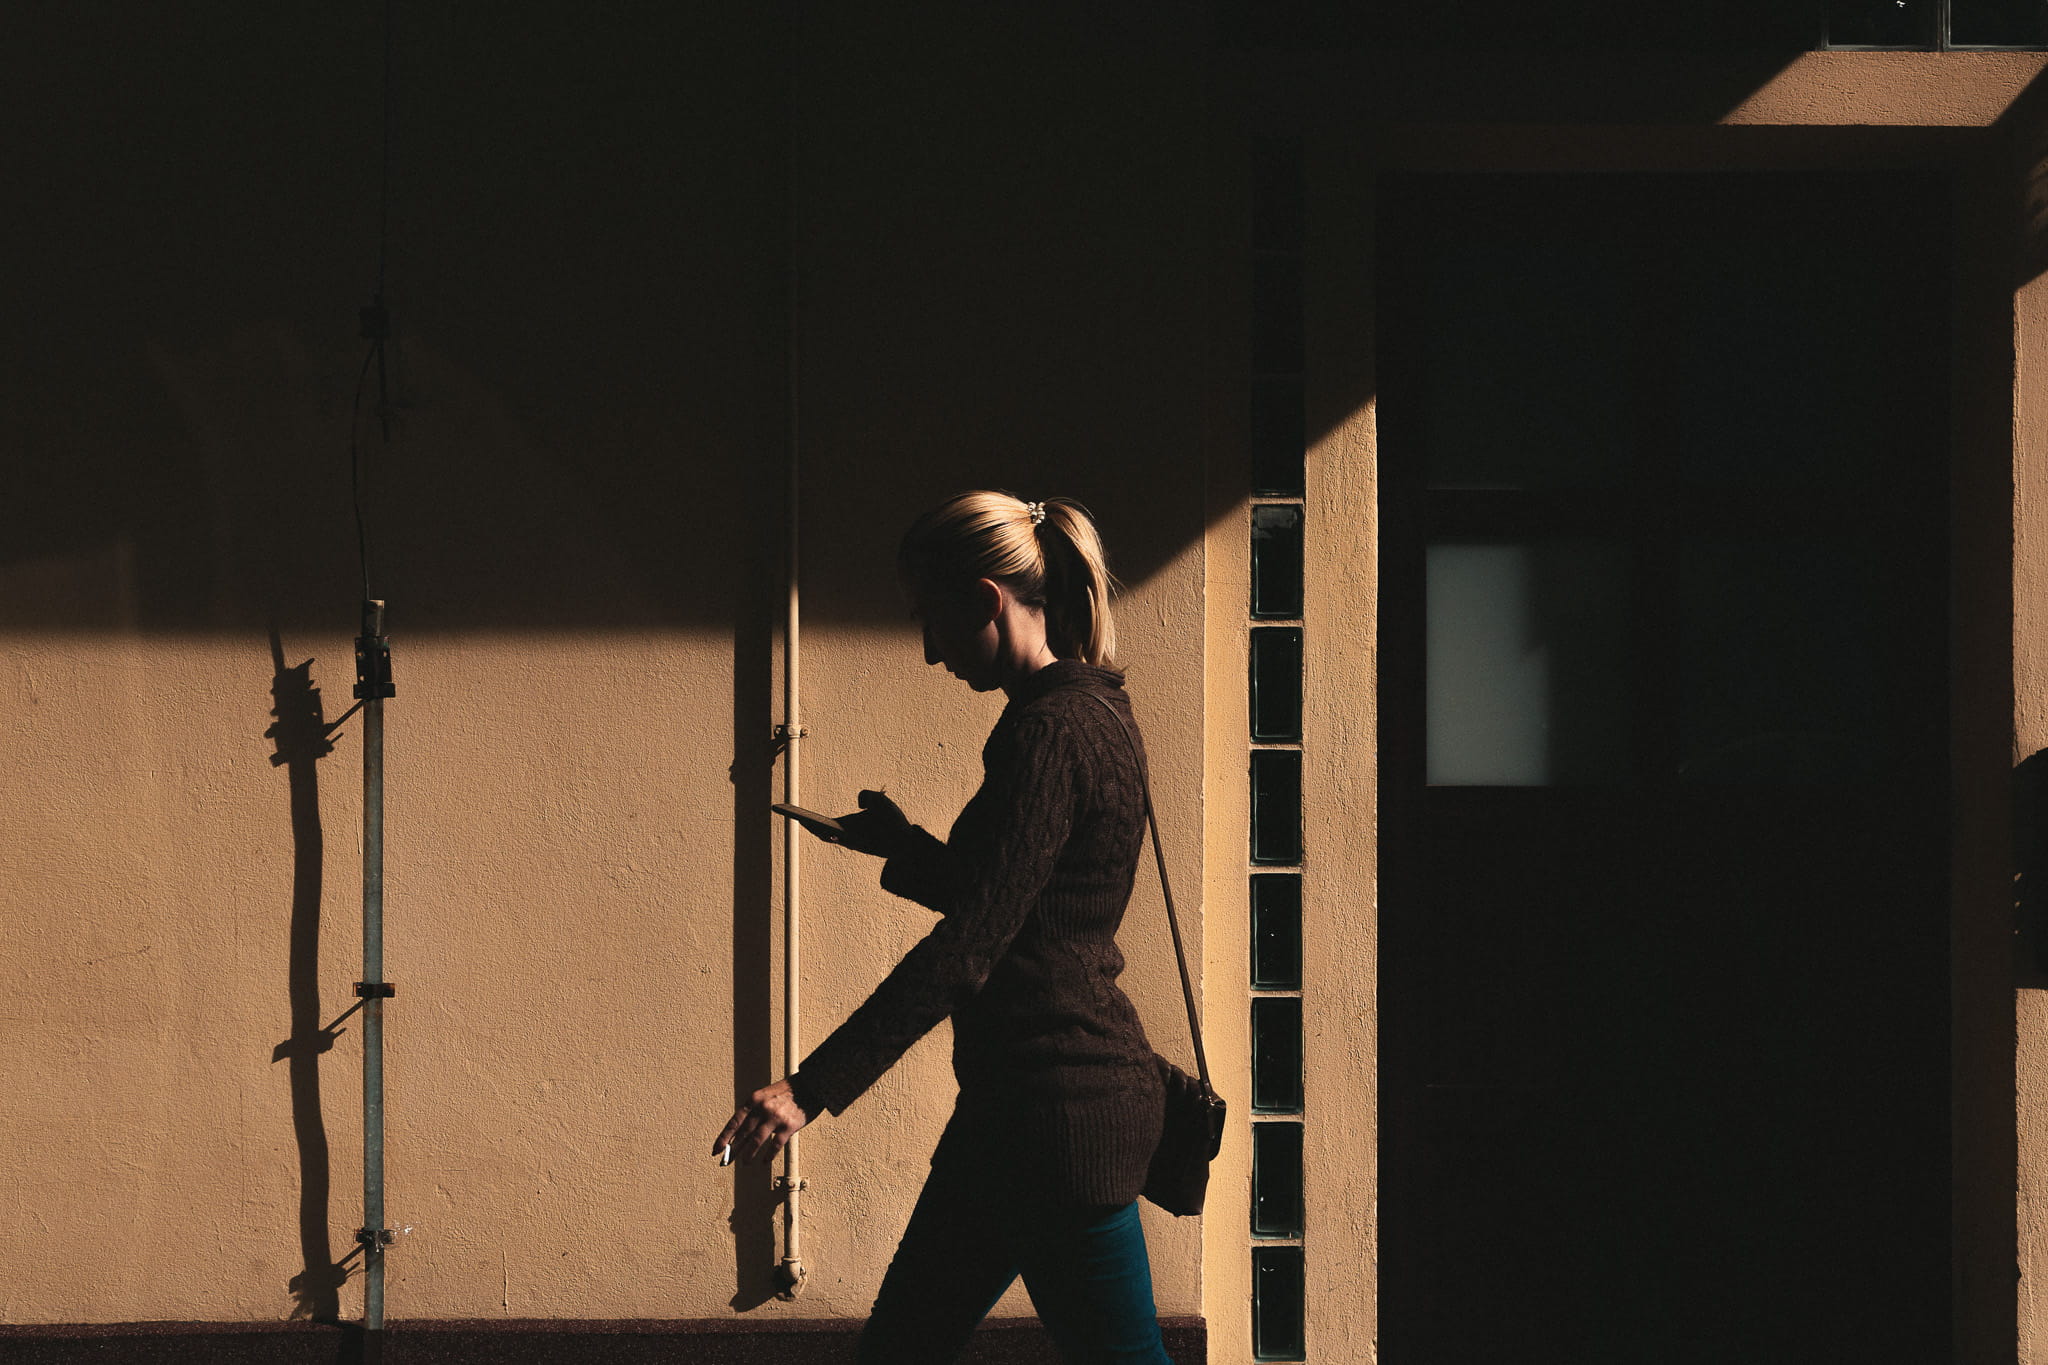 Blonde lady in a suit walking infront of a wall looking down at her phone in her hand